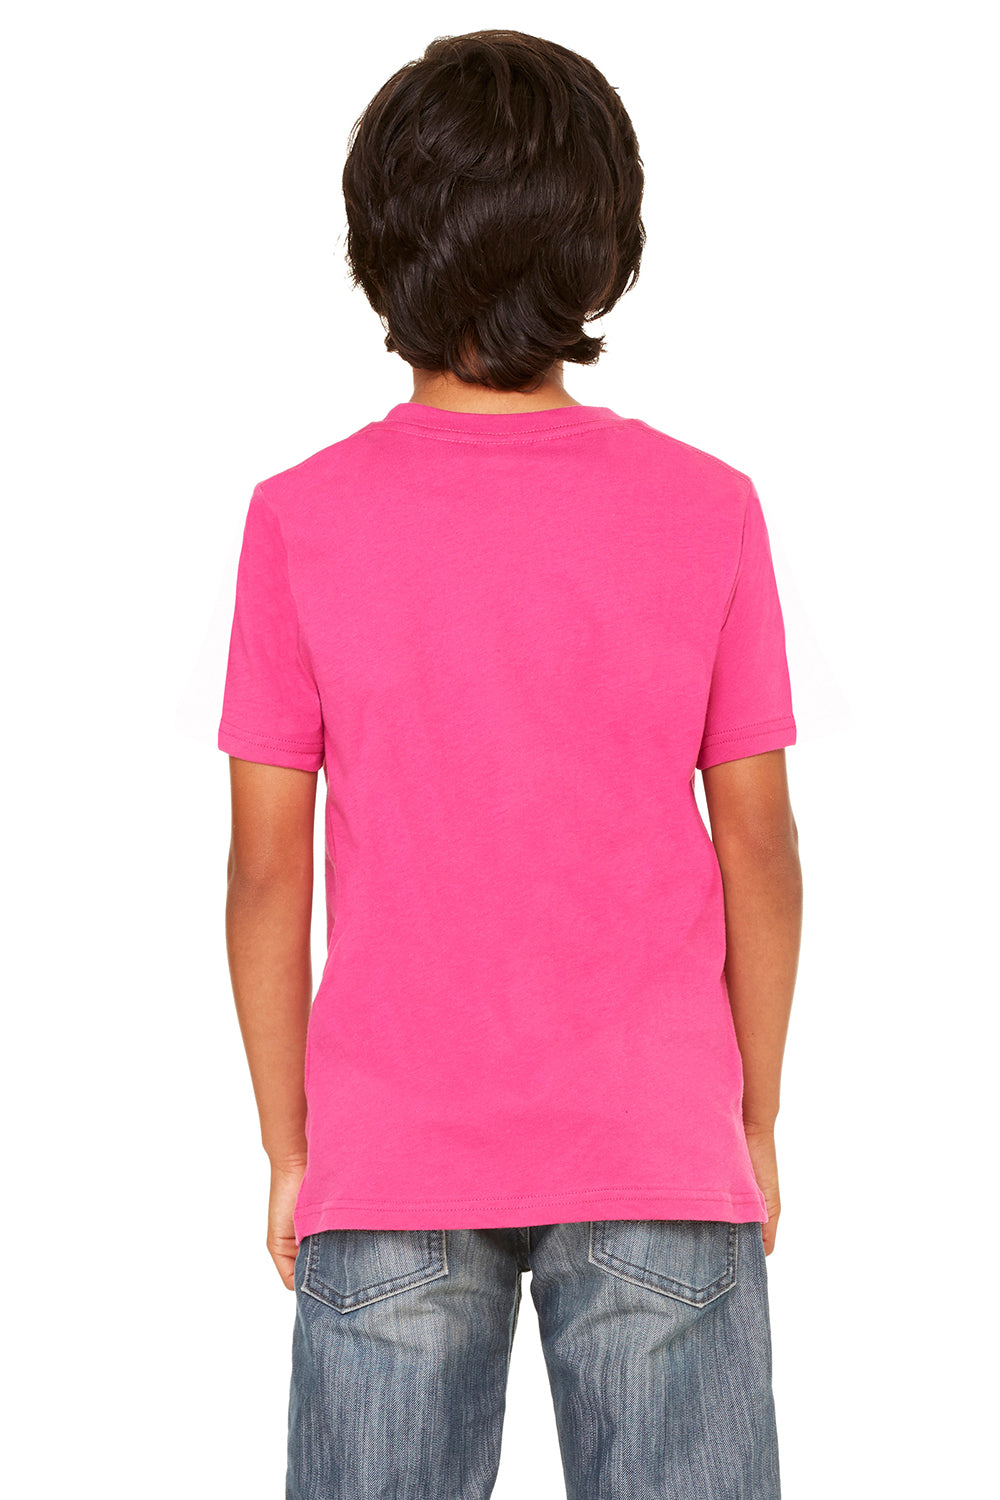 Bella + Canvas 3001Y Youth Jersey Short Sleeve Crewneck T-Shirt Berry Pink Model Back